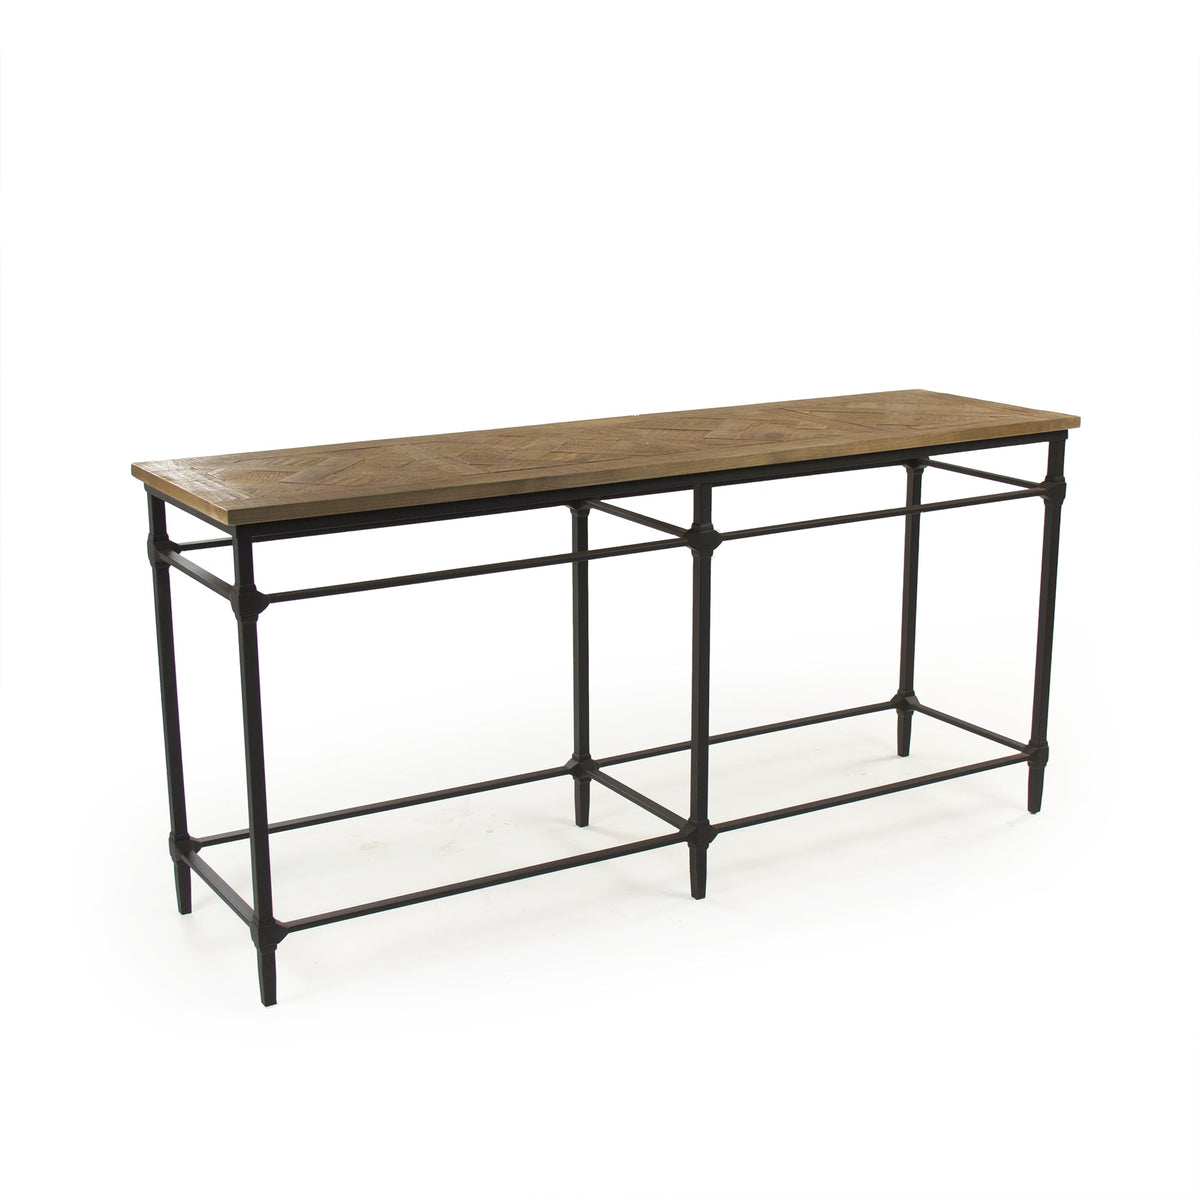 Aveline Console by Zentique